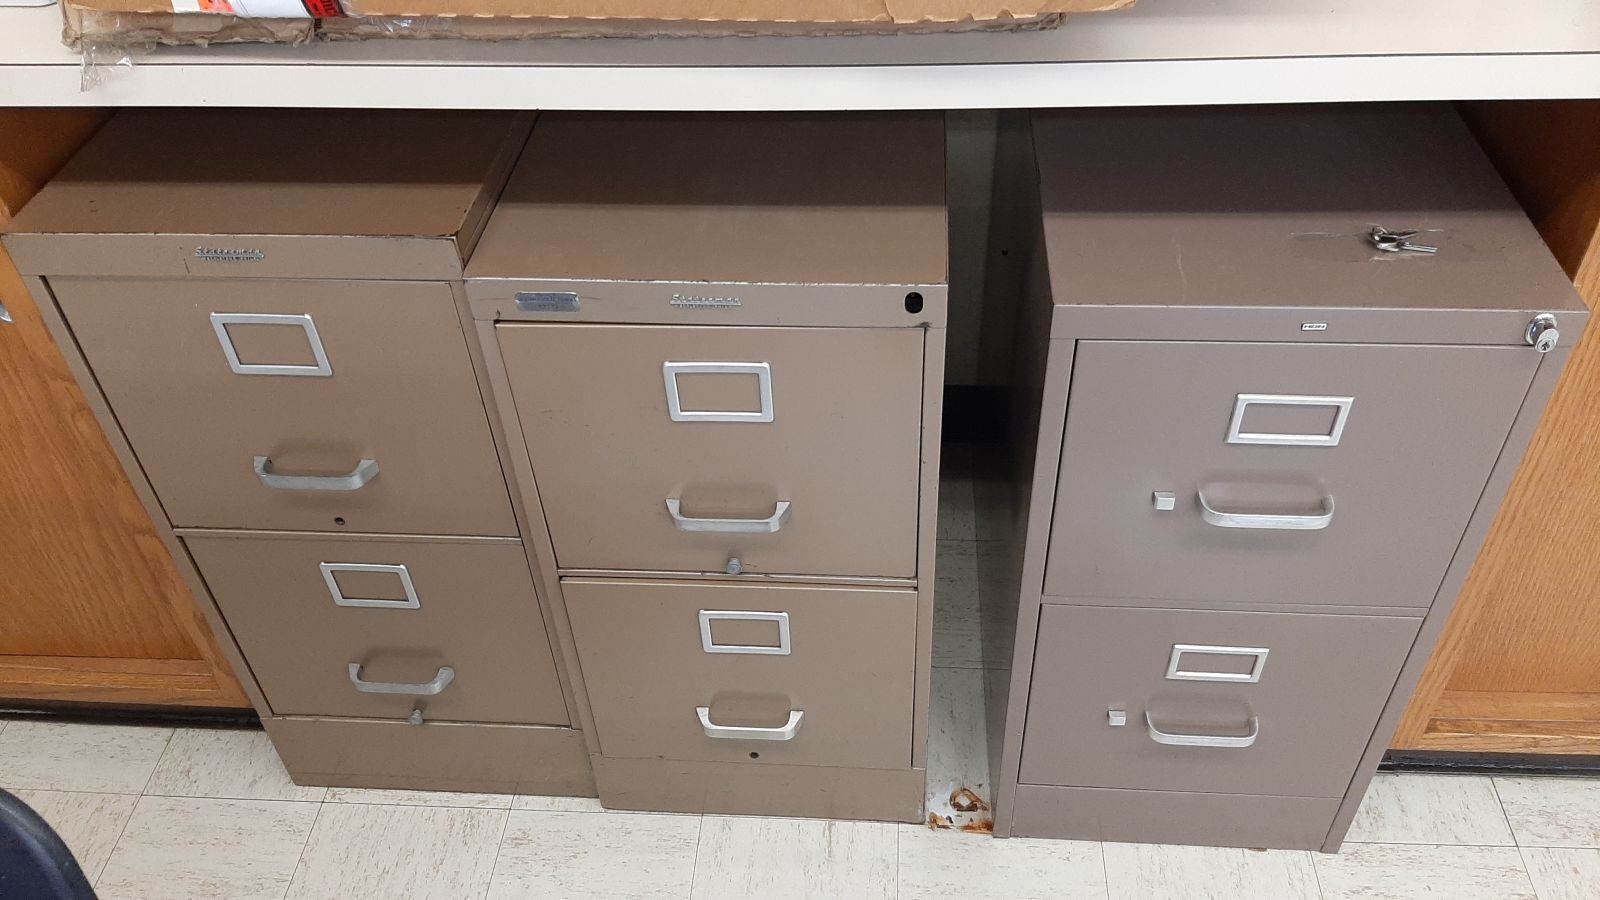 An image of three 2-drawer filing cabinets.